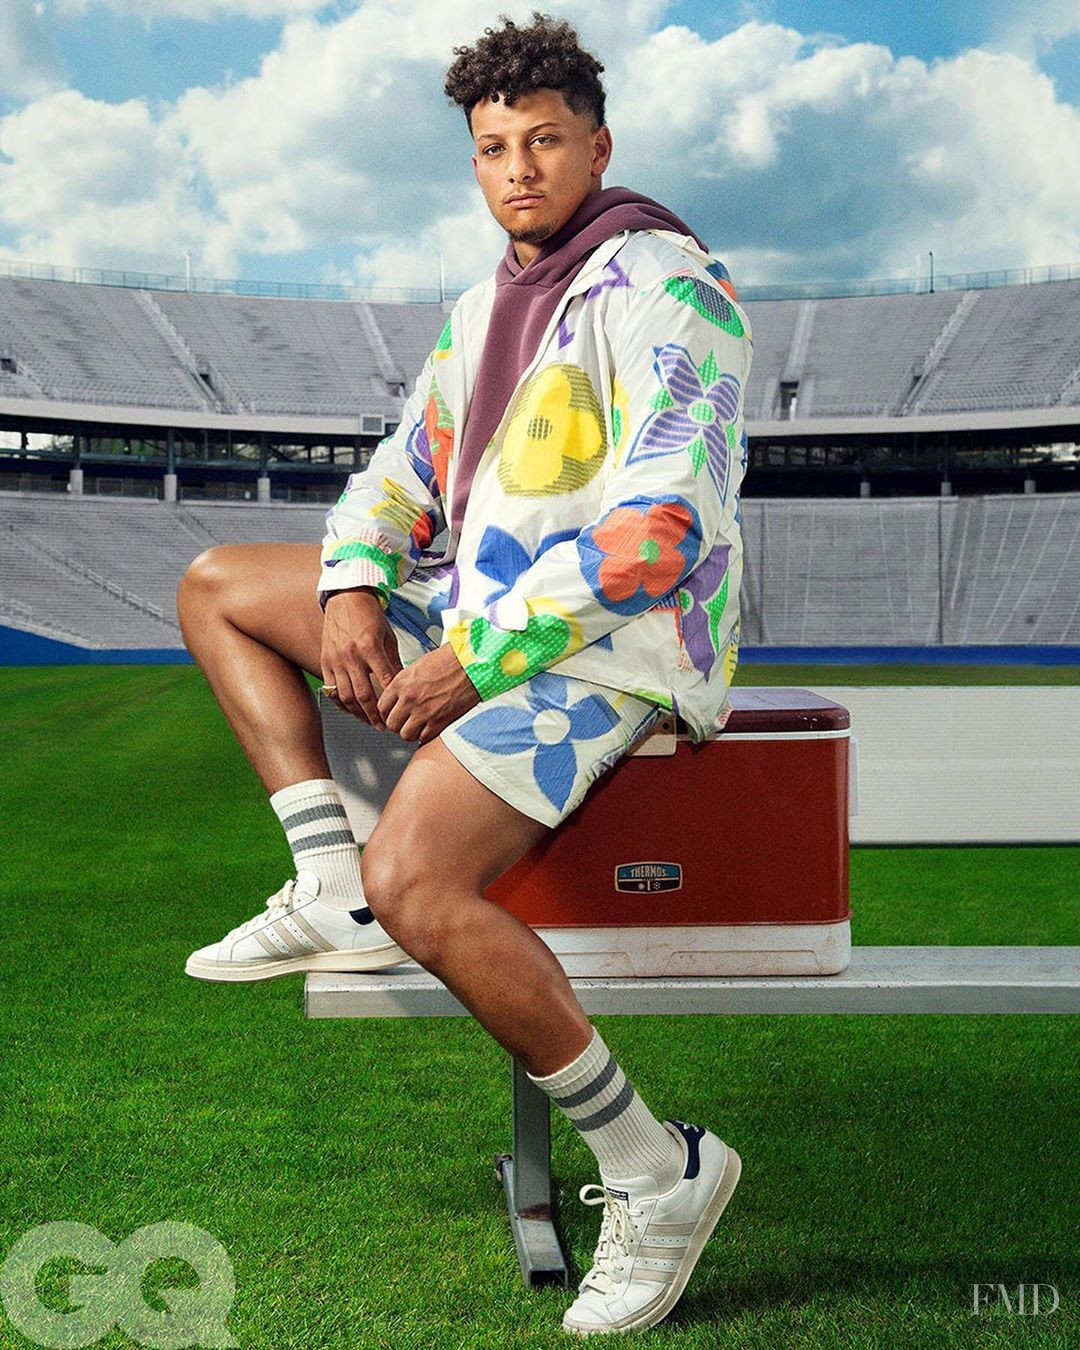 Patrick Mahomes in GQ USA with wearing Louis Vuitton,Tiffany & Co